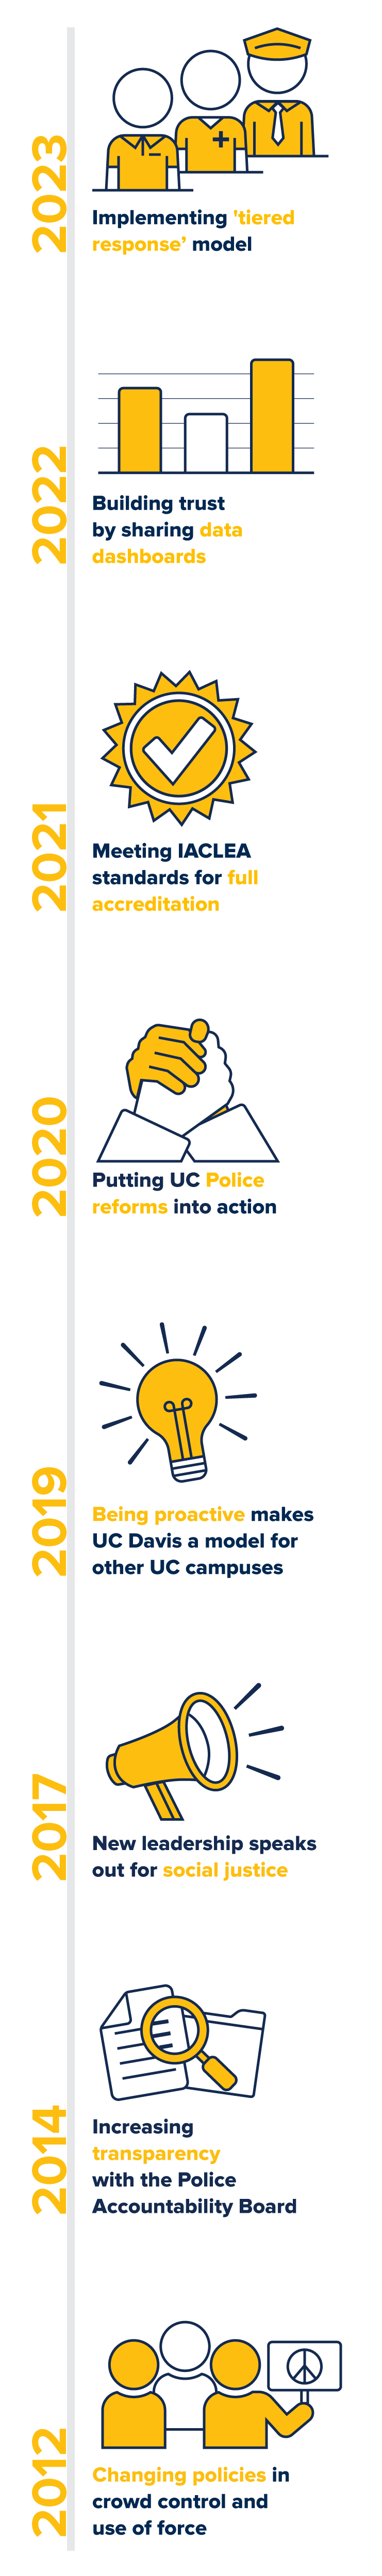 2023 - implementing tiered response model. 2022 - building trust by sharing data dashboards. 2021 - meeting IACLEA standards for full accreditation. 2020 - putting UC police reforms into action. 2019 - being proactive makes UC Davis a model for other UC campuses. 2017 - new leadership speaks out for social justice. 2014 - increasing transparency with the police accountability board. 2012 - changing policies in crowd control and use of force.